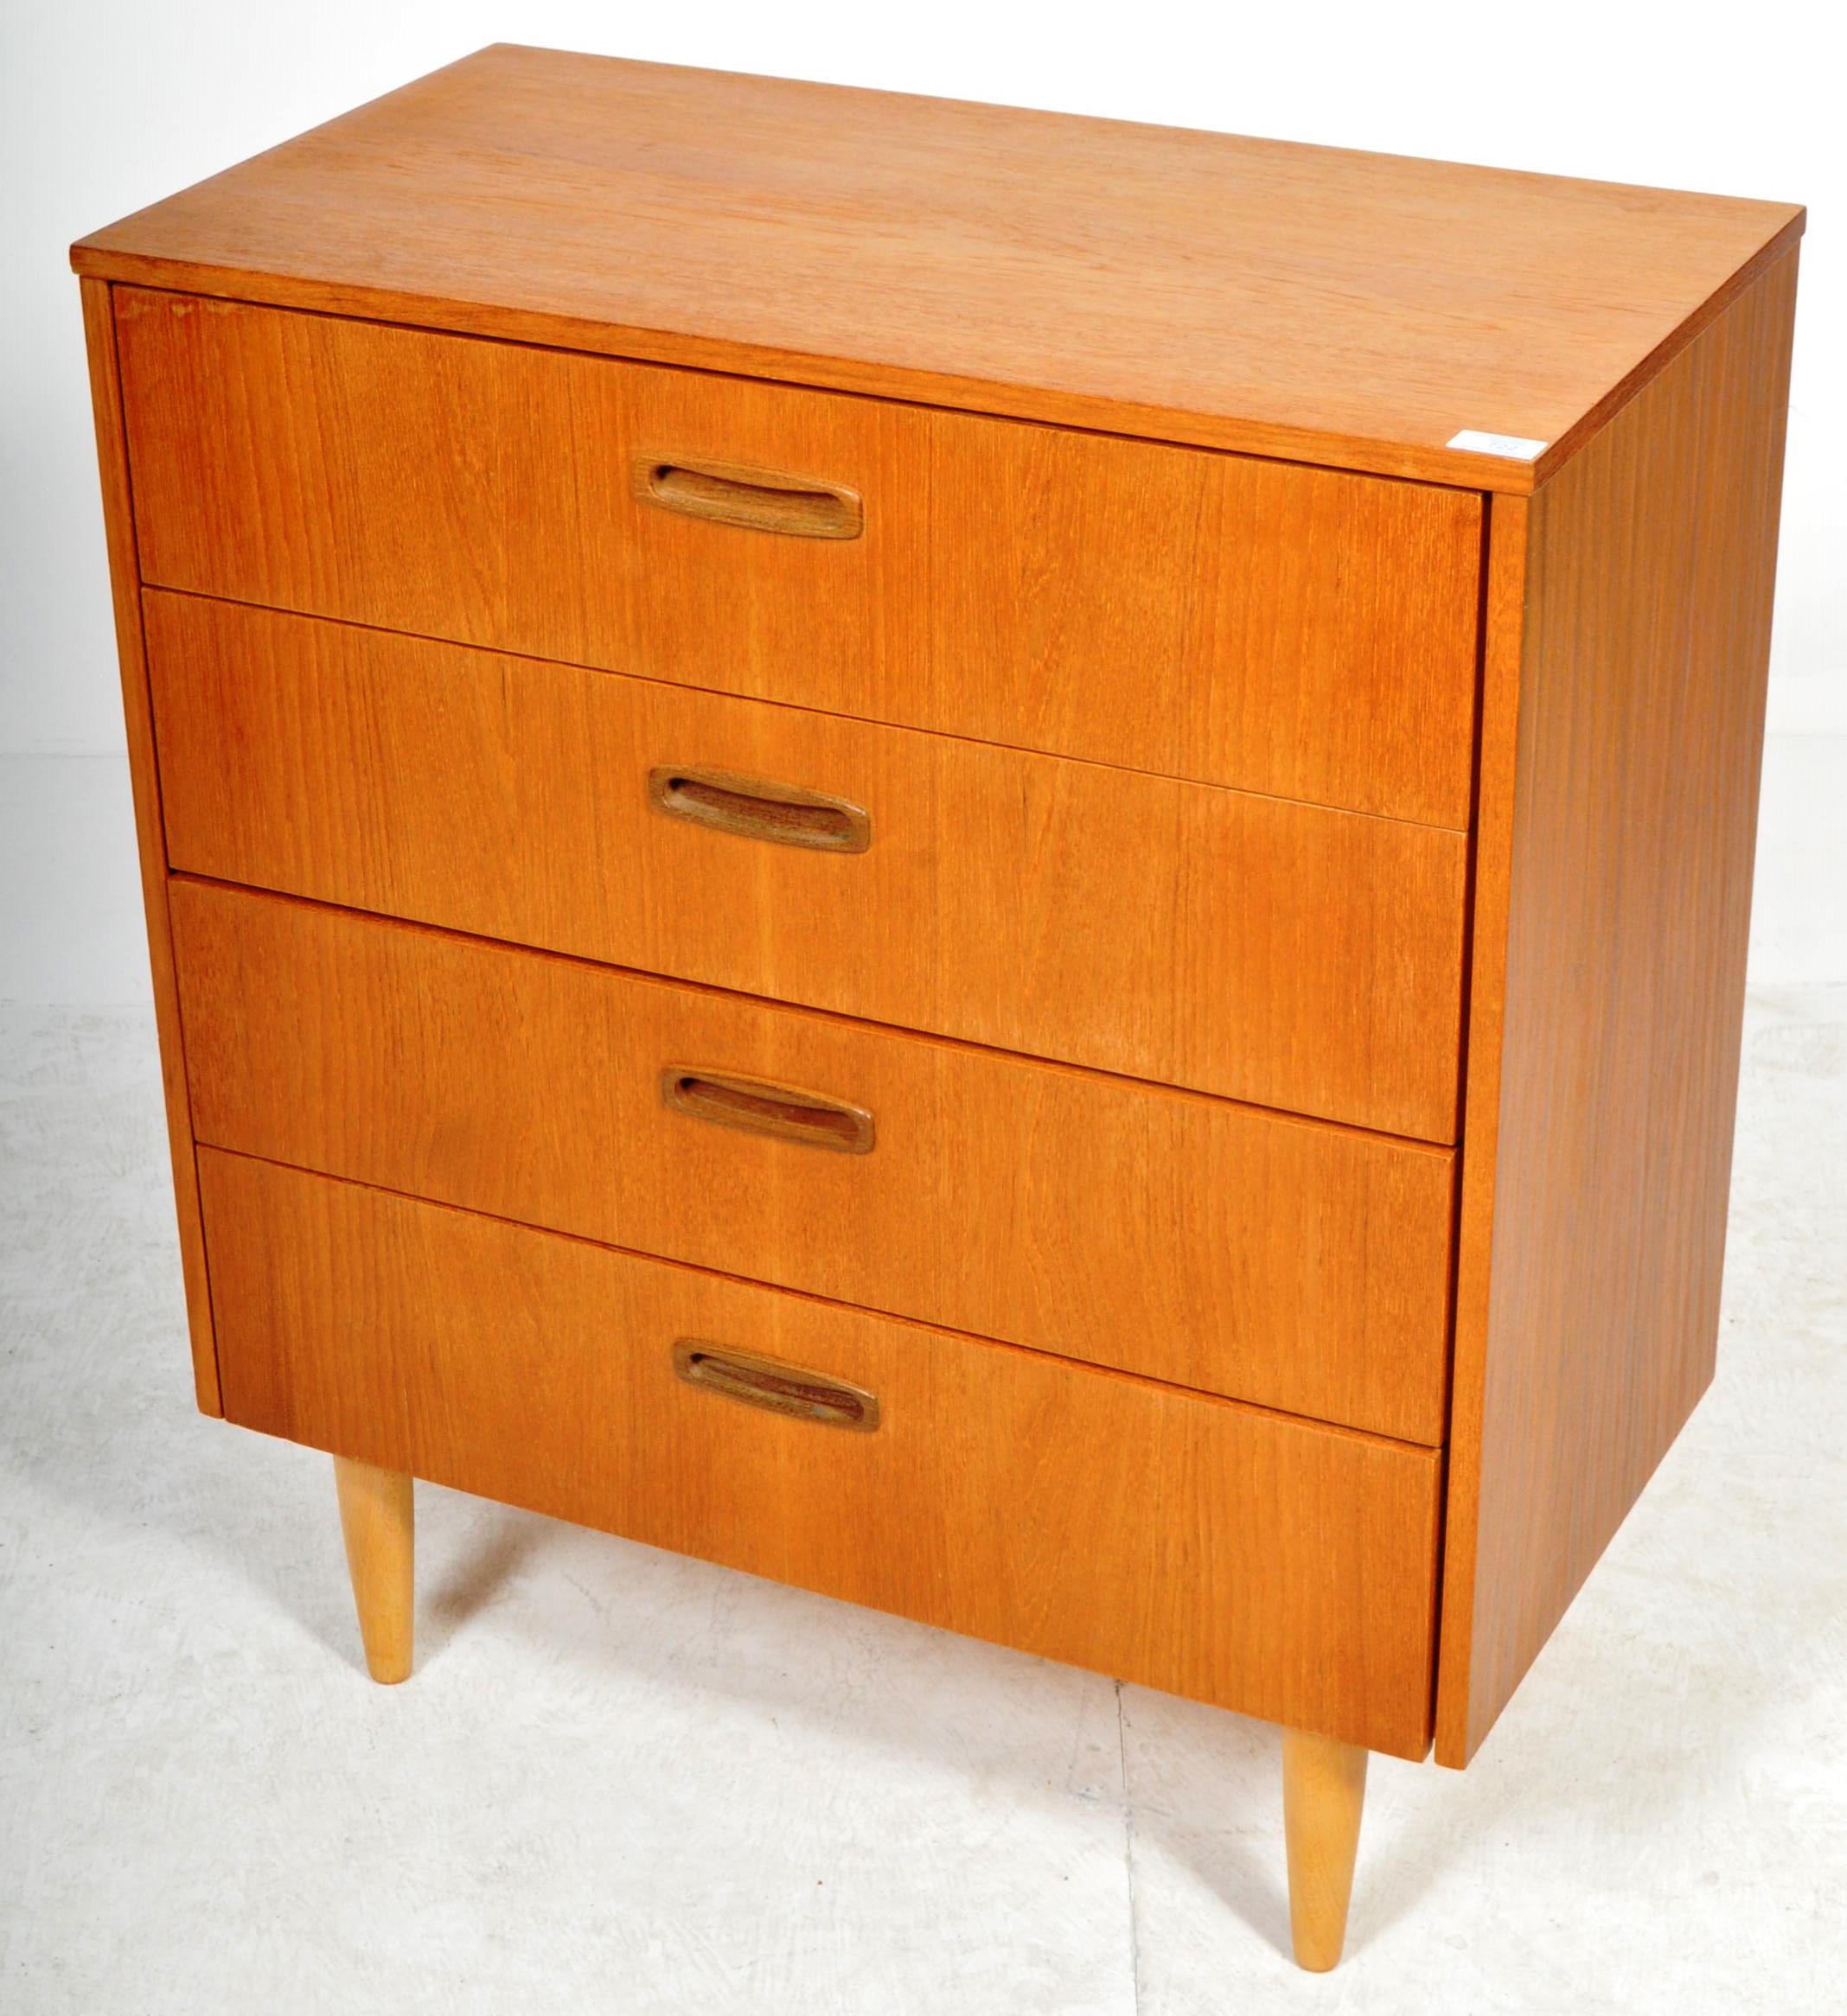 JENTIQUE - MID 20TH CENTURY TEAK CHEST OF DRAWERS - Image 2 of 8